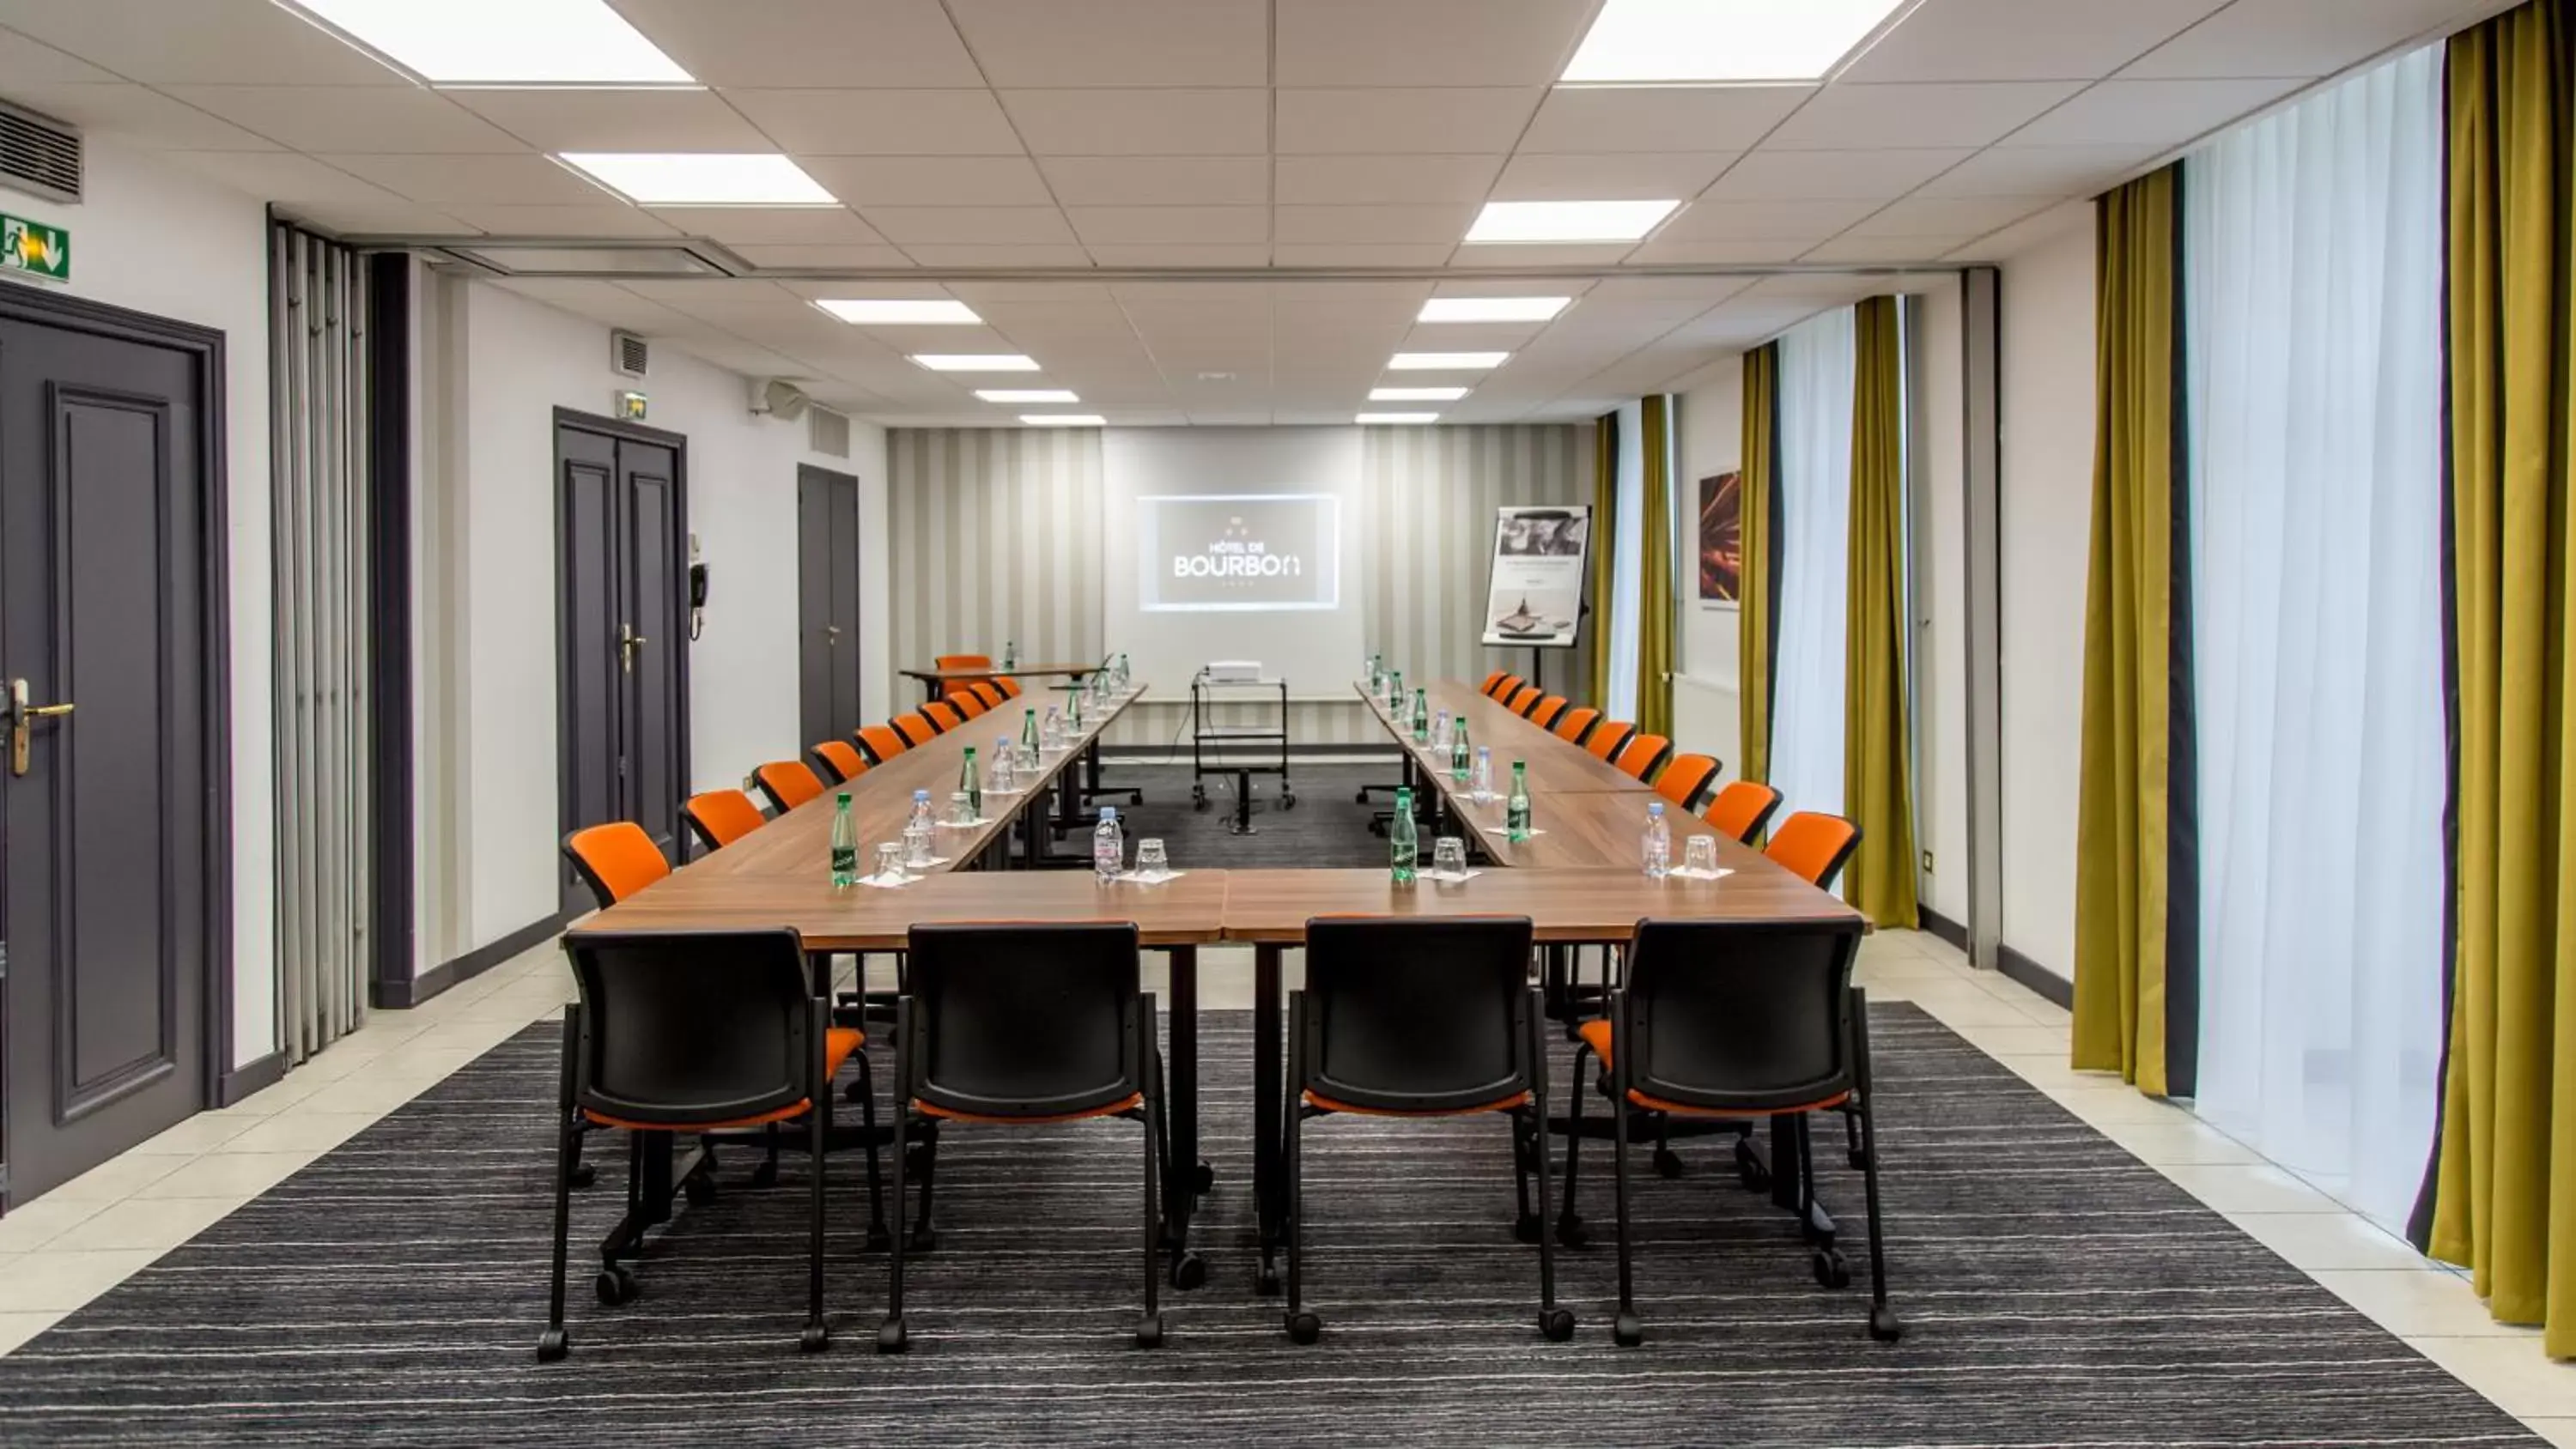 Meeting/conference room in Hotel De Bourbon Grand Hotel Mercure Bourges